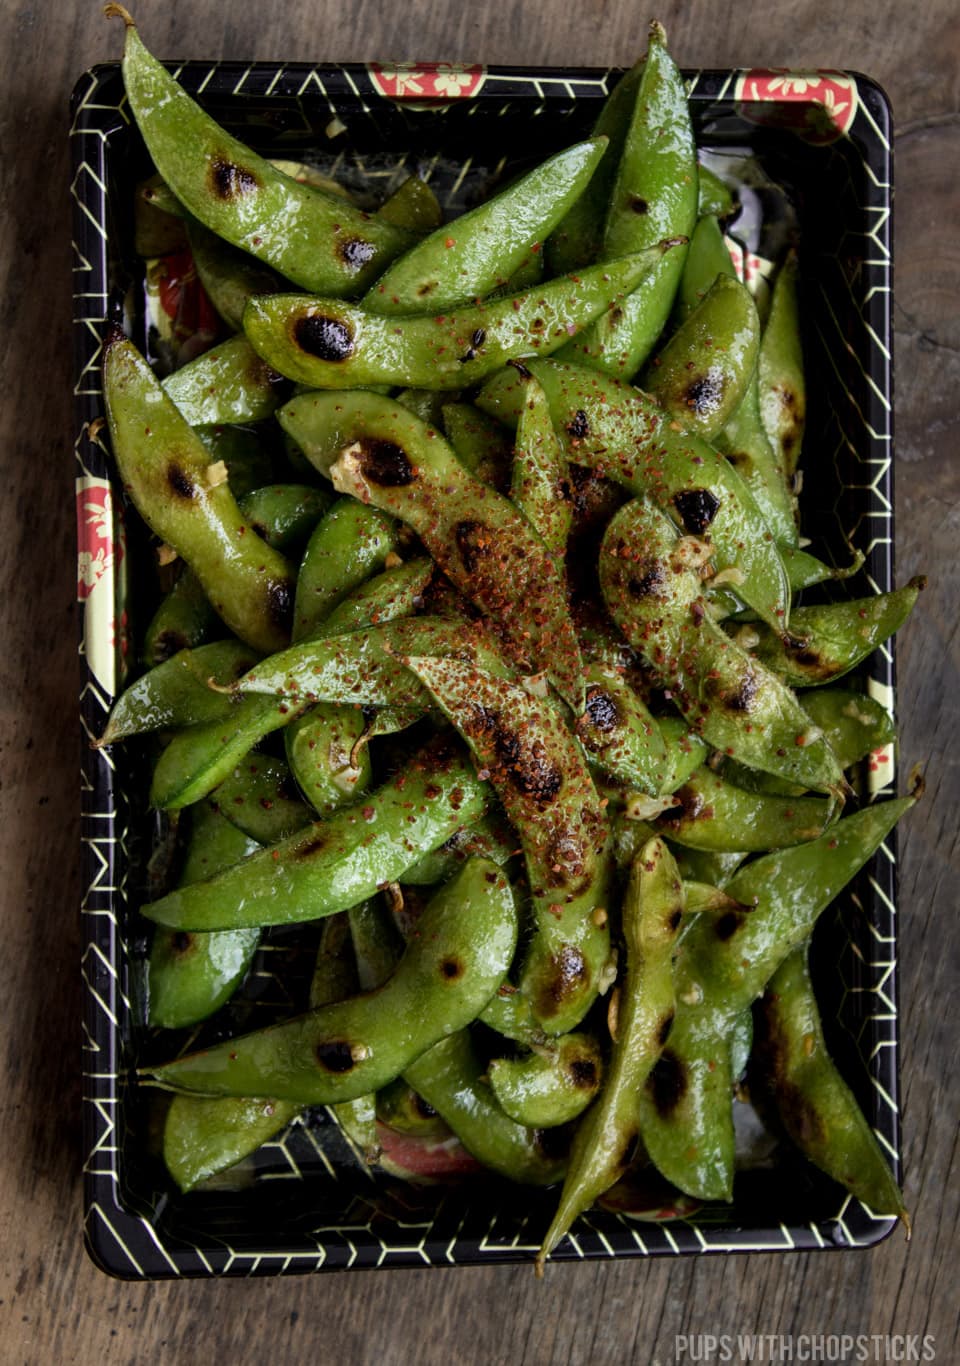 Quick & easy buttery charred Edamame recipe loaded with natural umami and tossed with a garlicky lemon butter. Quick, healthy and flavorful snack! #snack #vegan #vegetarian #edamame #quickandeasy #appetizer #recipe #beans #roasted